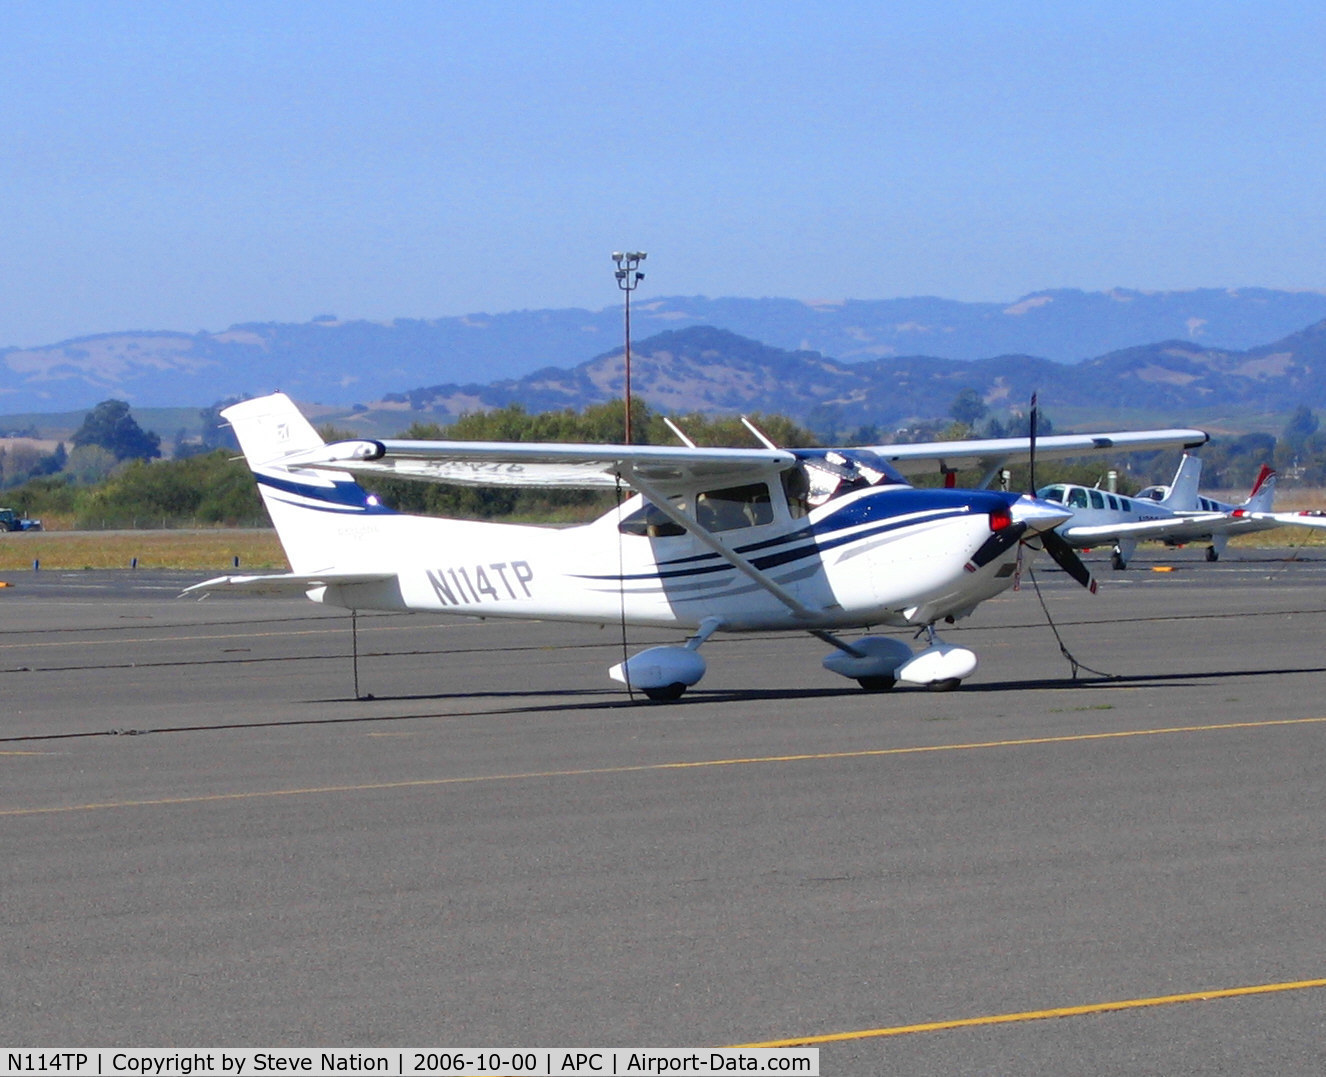 N114TP, 2005 Cessna T182T Turbo Skylane C/N T18208398, 2005 Cessna T182T @ Napa County Airport, CA